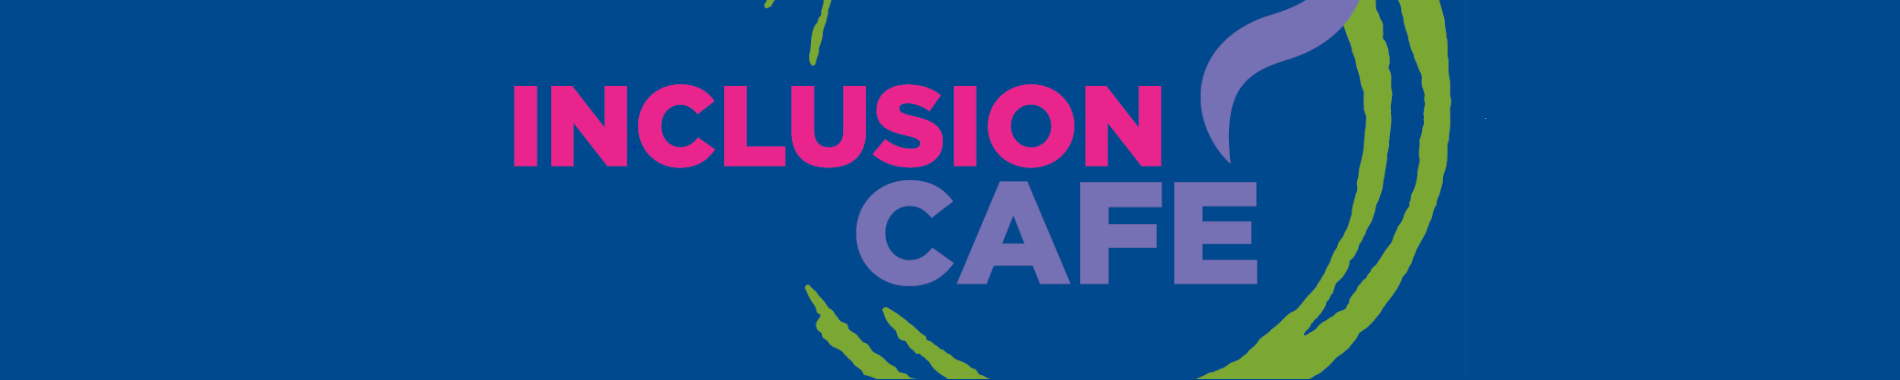 Inclusion cafe 1900x380